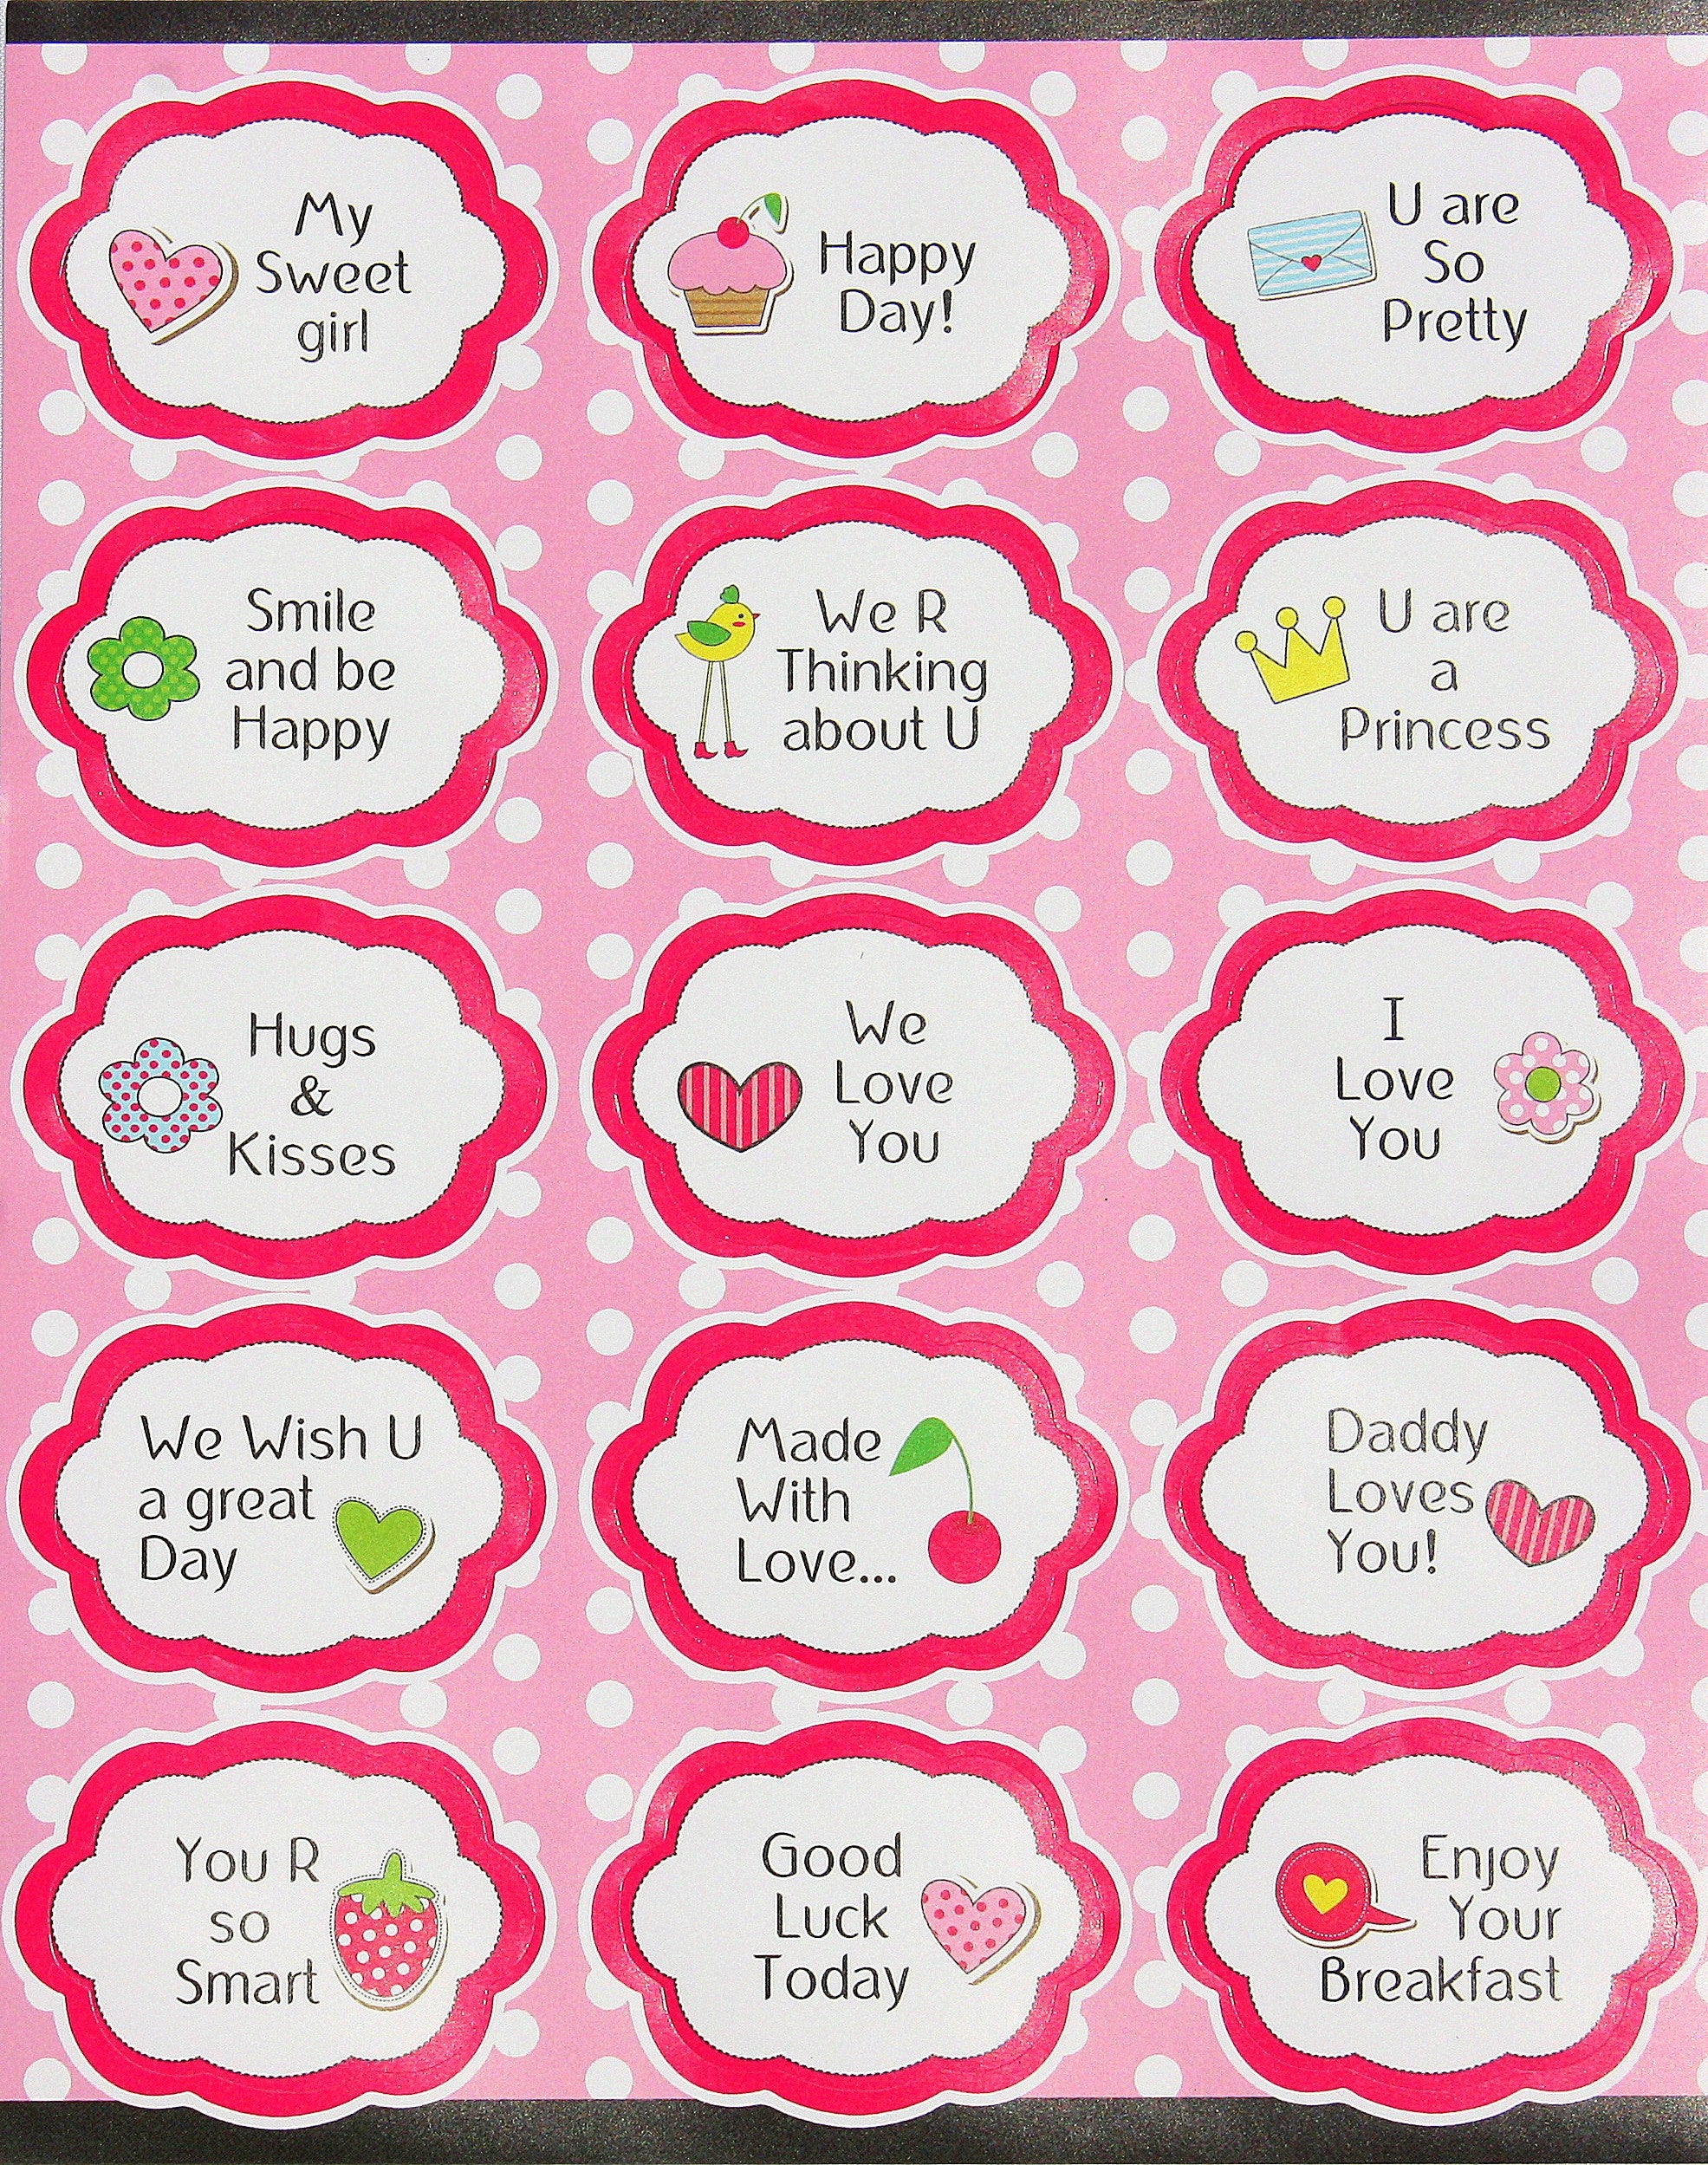 Quote Stickers The Printables More Motivational Quotes Printable Stickers For You To Download